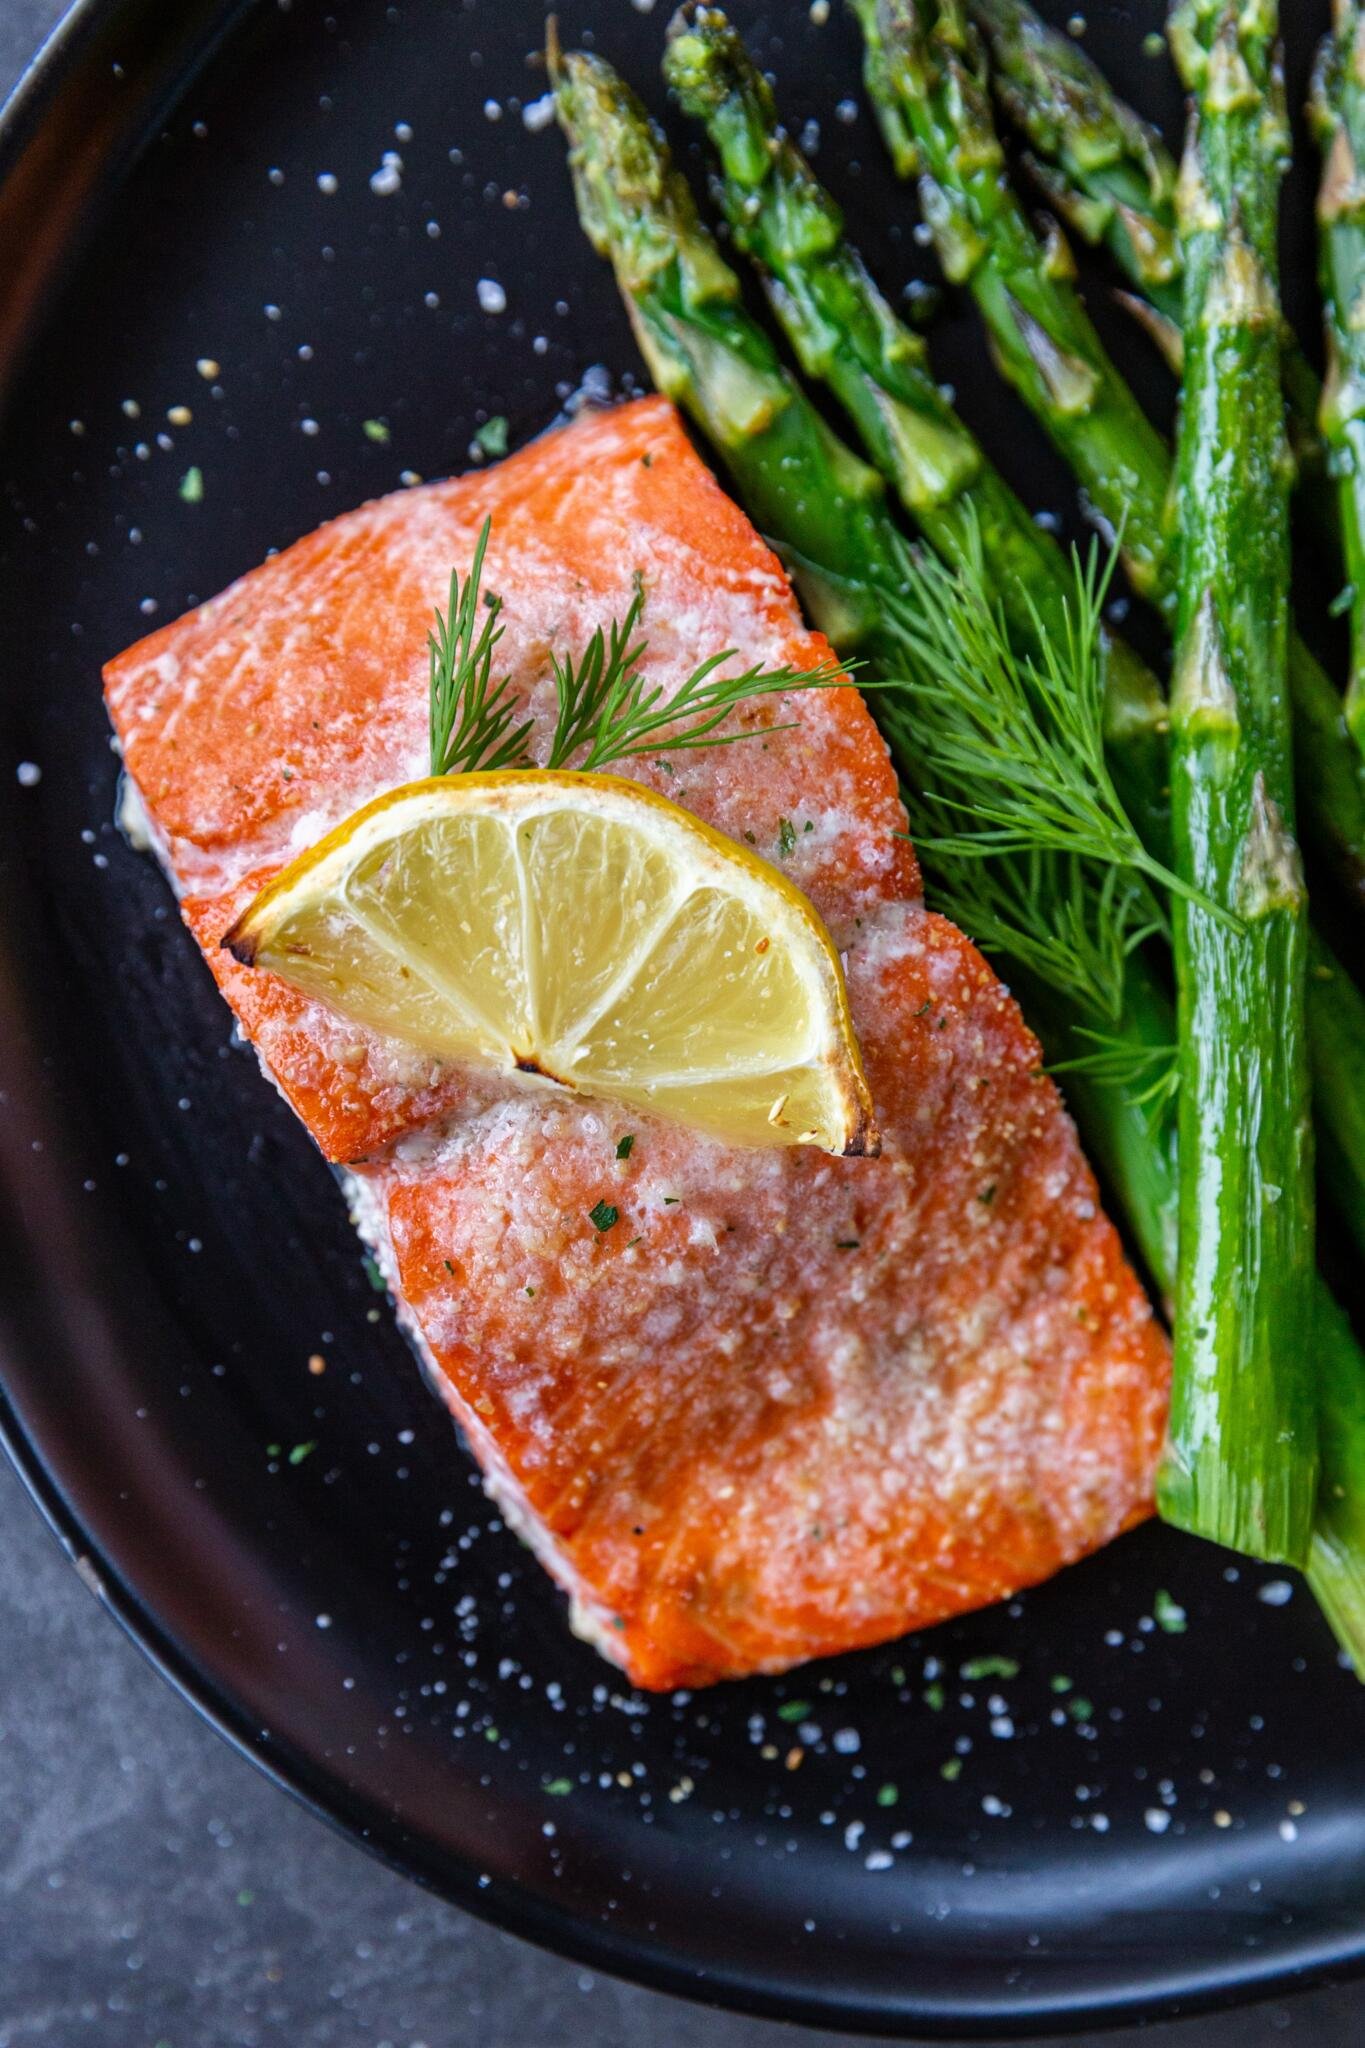 Perfectly Cook Salmon in the Oven